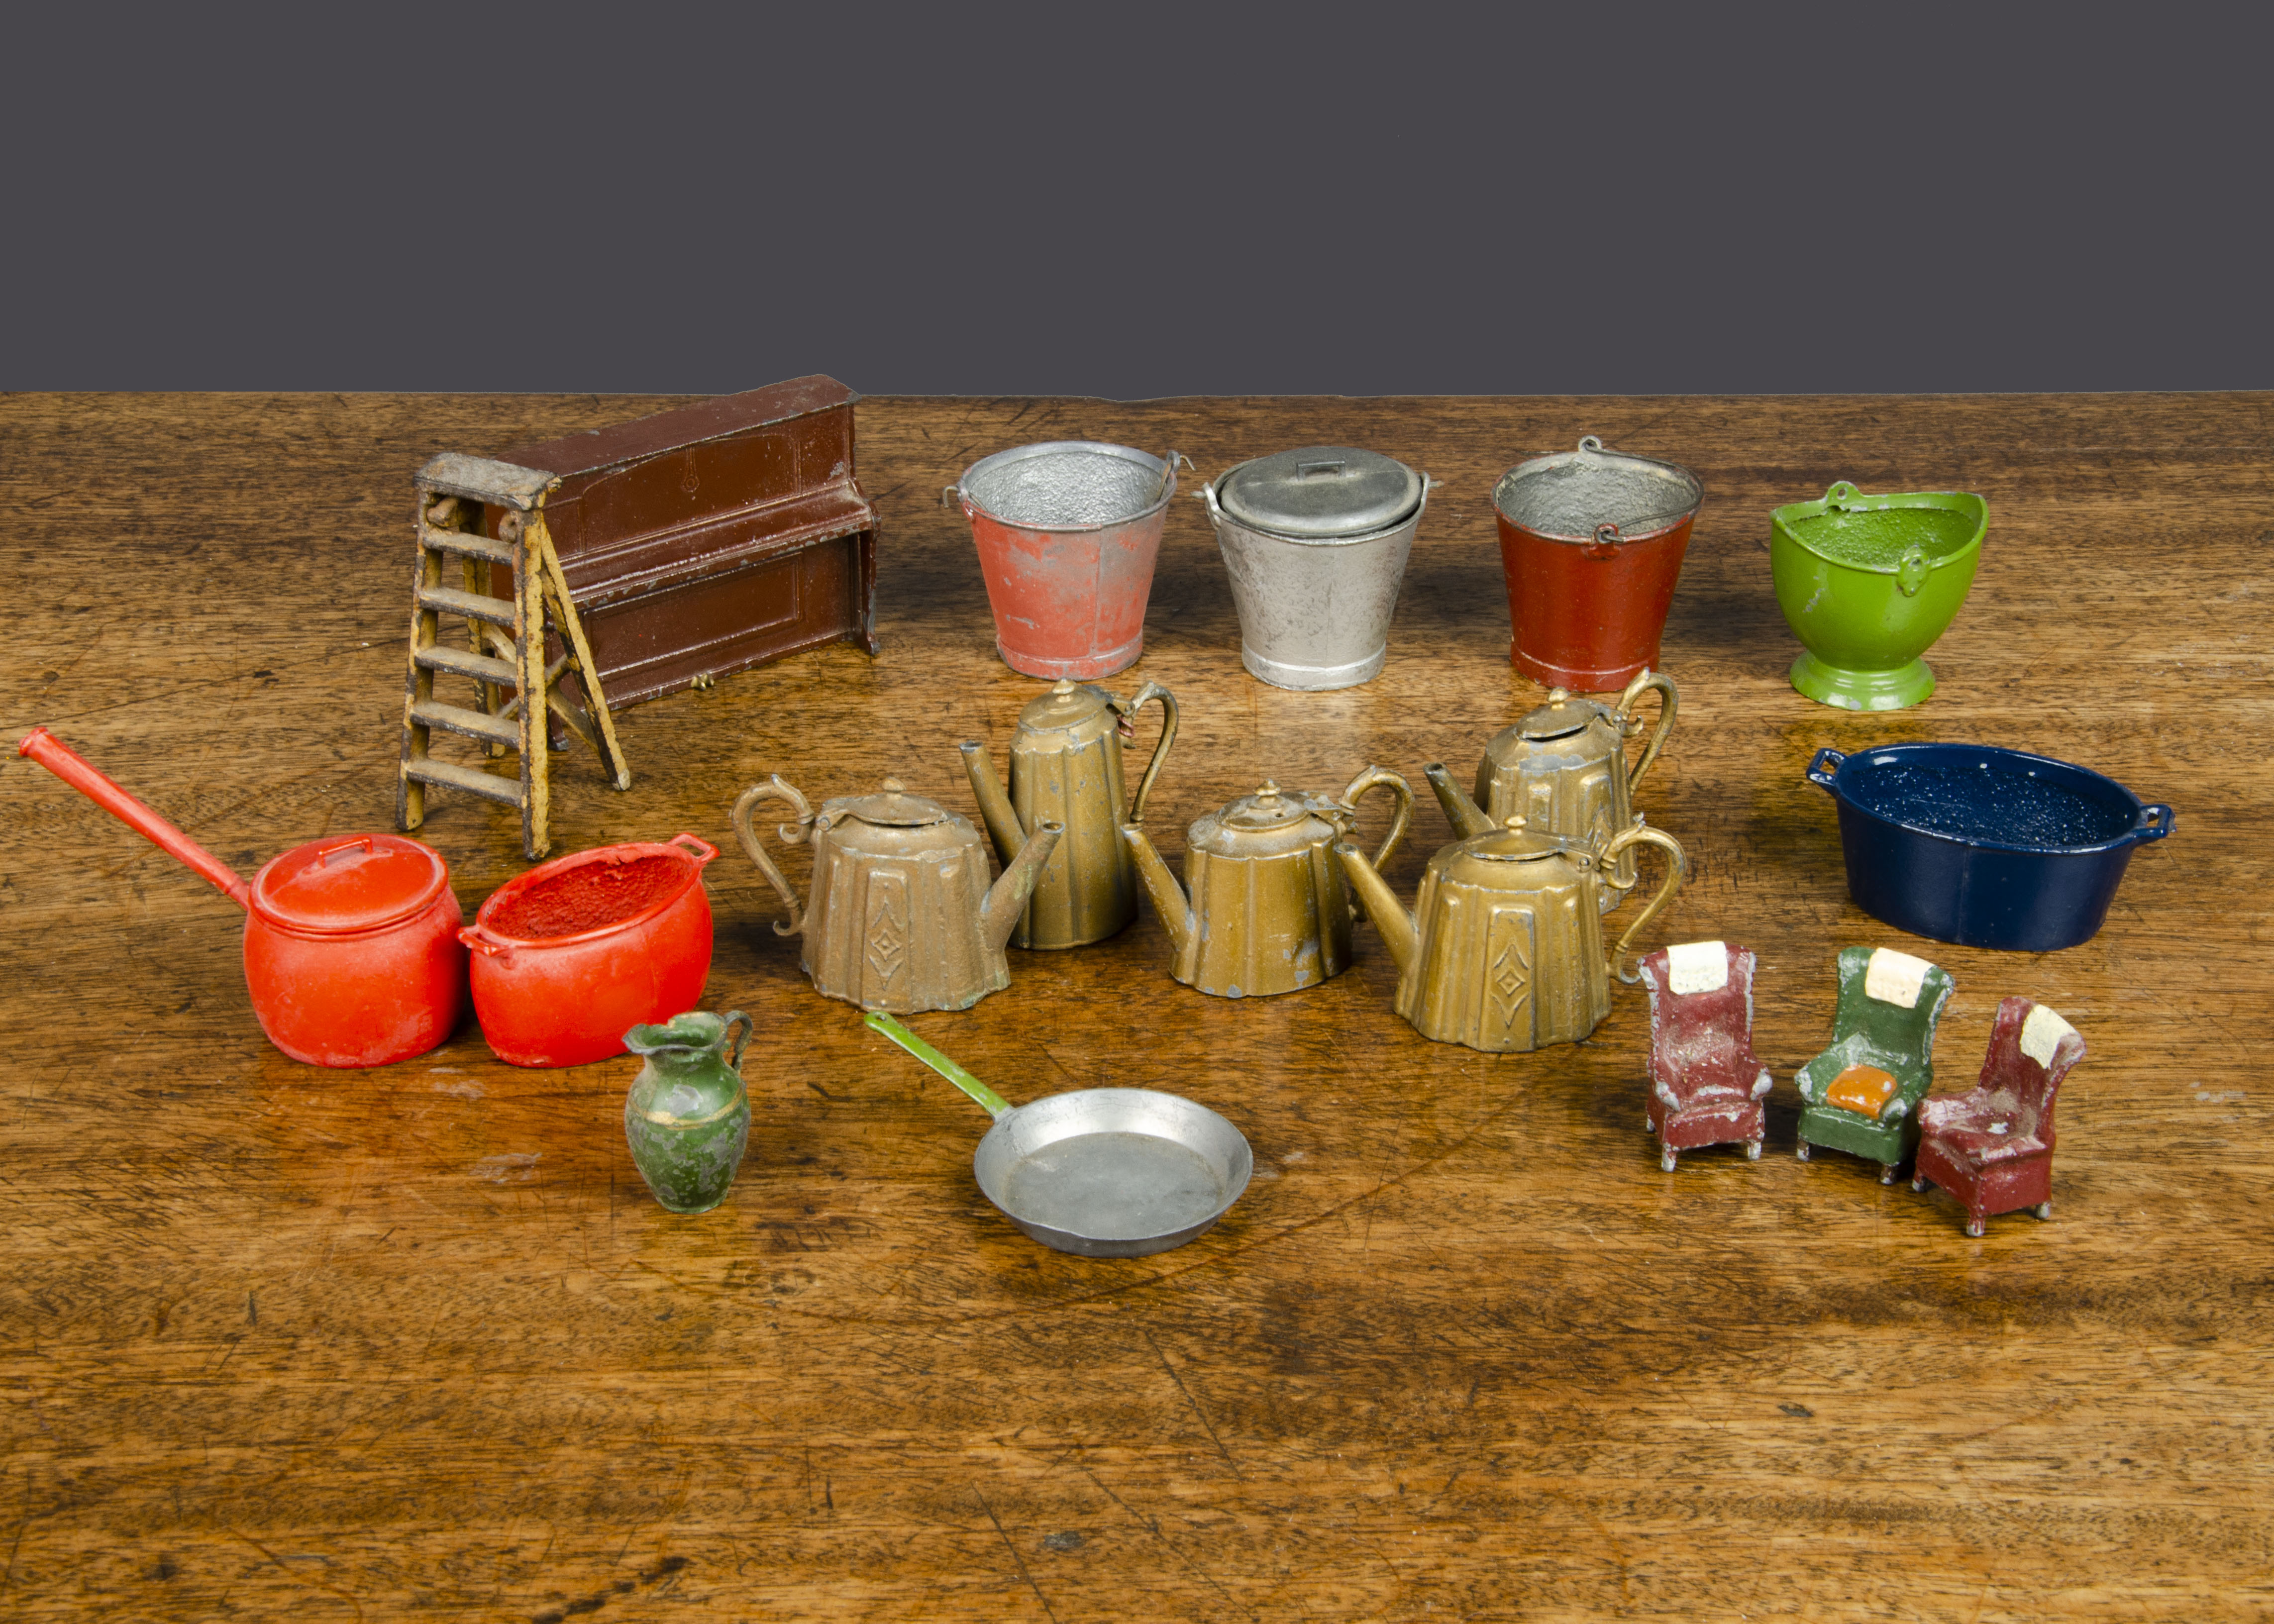 Dolls’ house and doll toy manufacturer items, Britains - red-painted saucepan and two handled pan, a